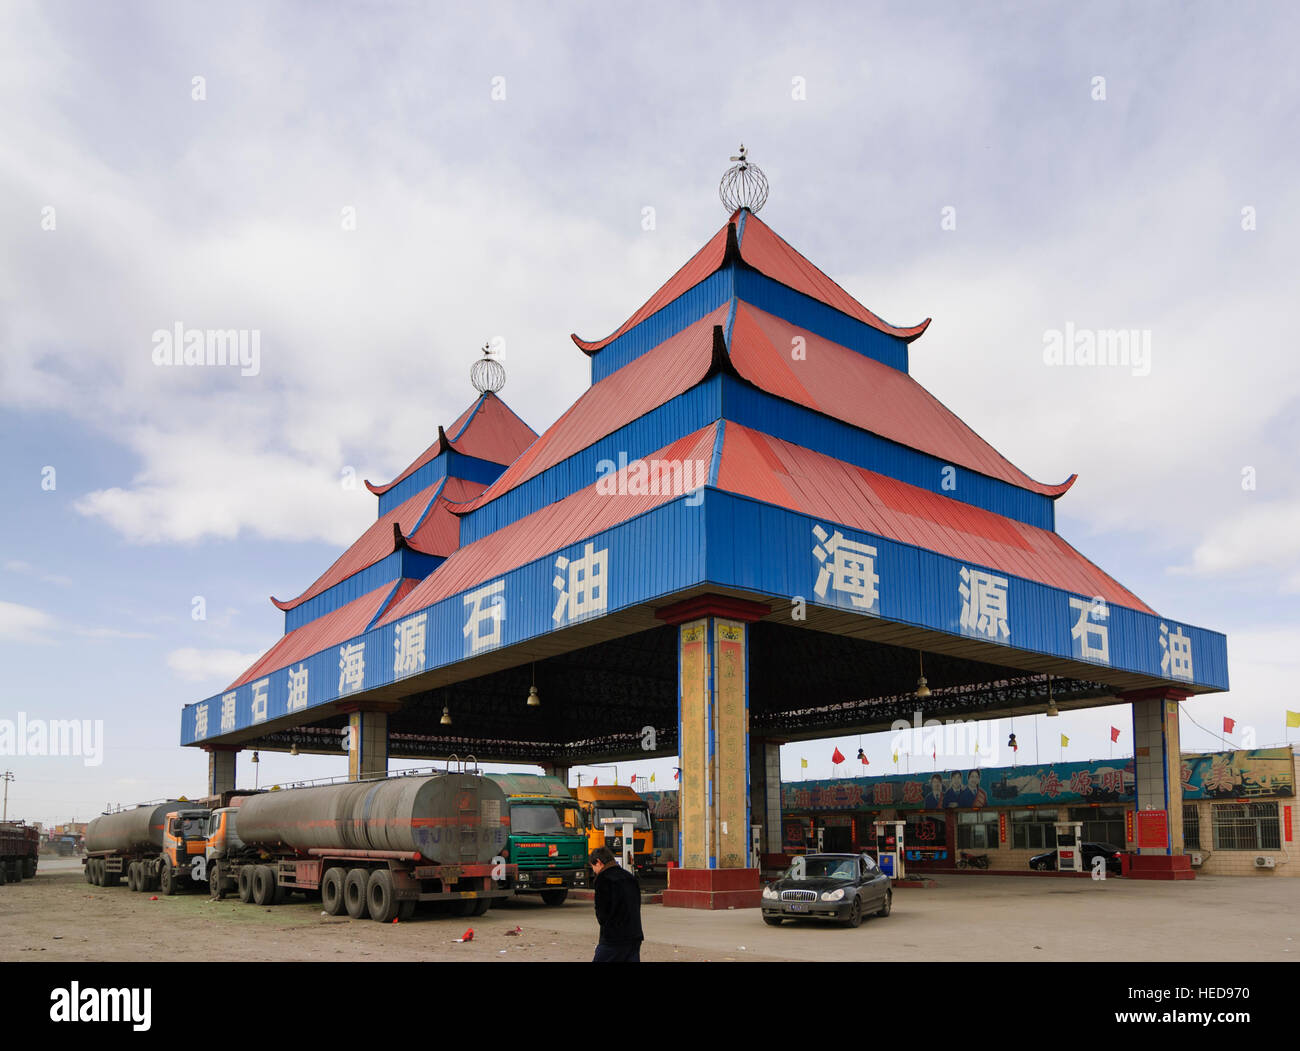 Yingxian : Gas station, Shanxi, Chine Banque D'Images